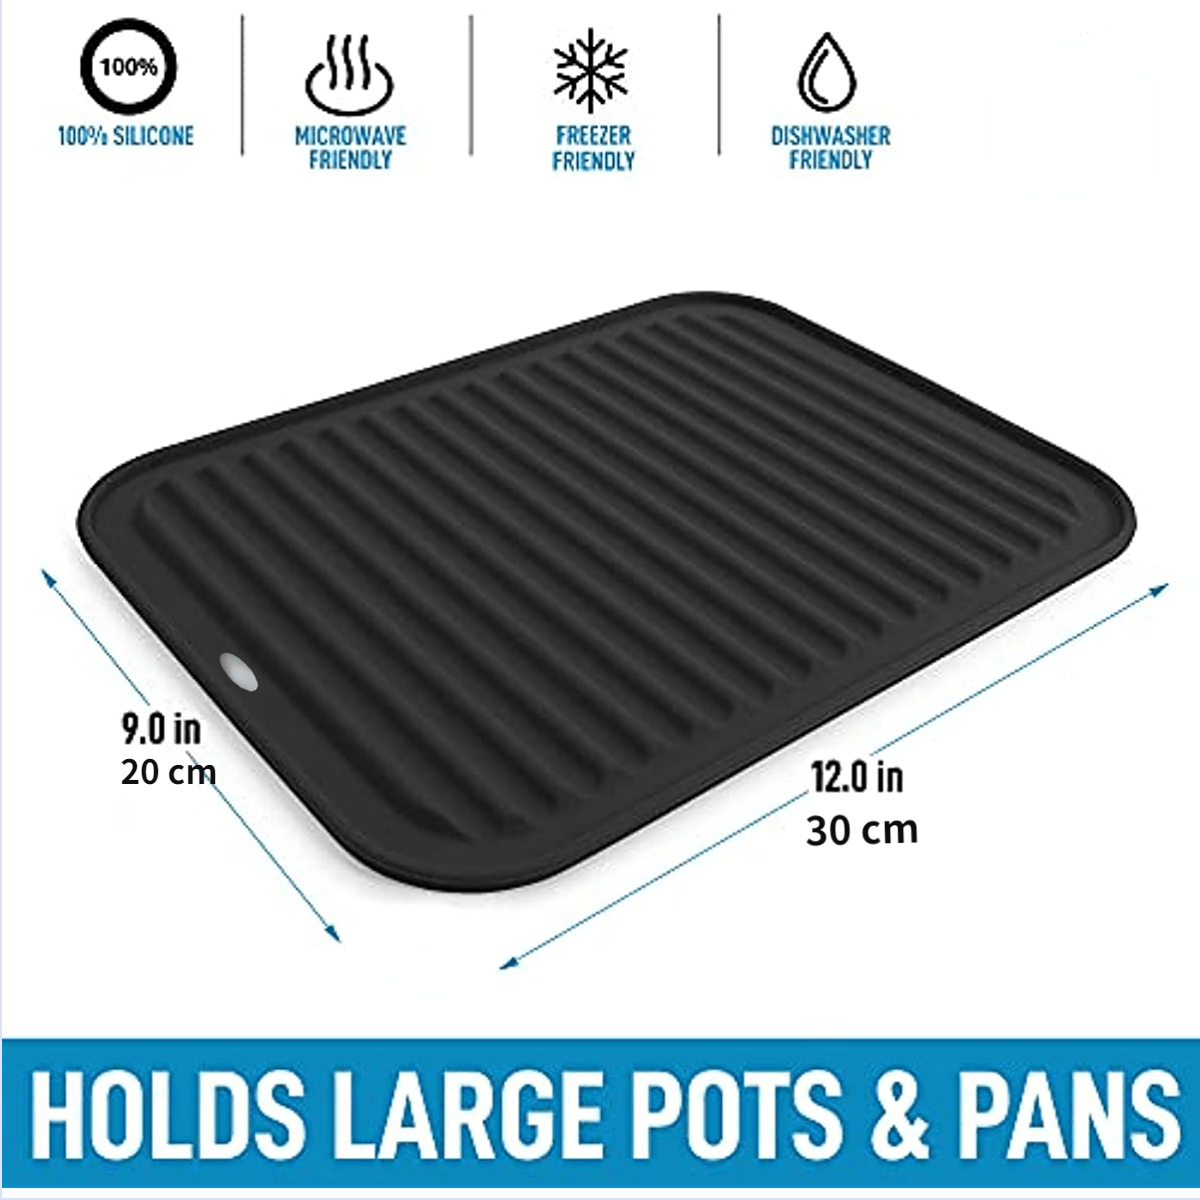 Visland Silicone Trivet Mat Hot Pot Holder Driying Mat for Hot Dishes, Hot  Pots and Hot Pan, Non Slip Heat Resistant Hot Pads for Tables, Countertop